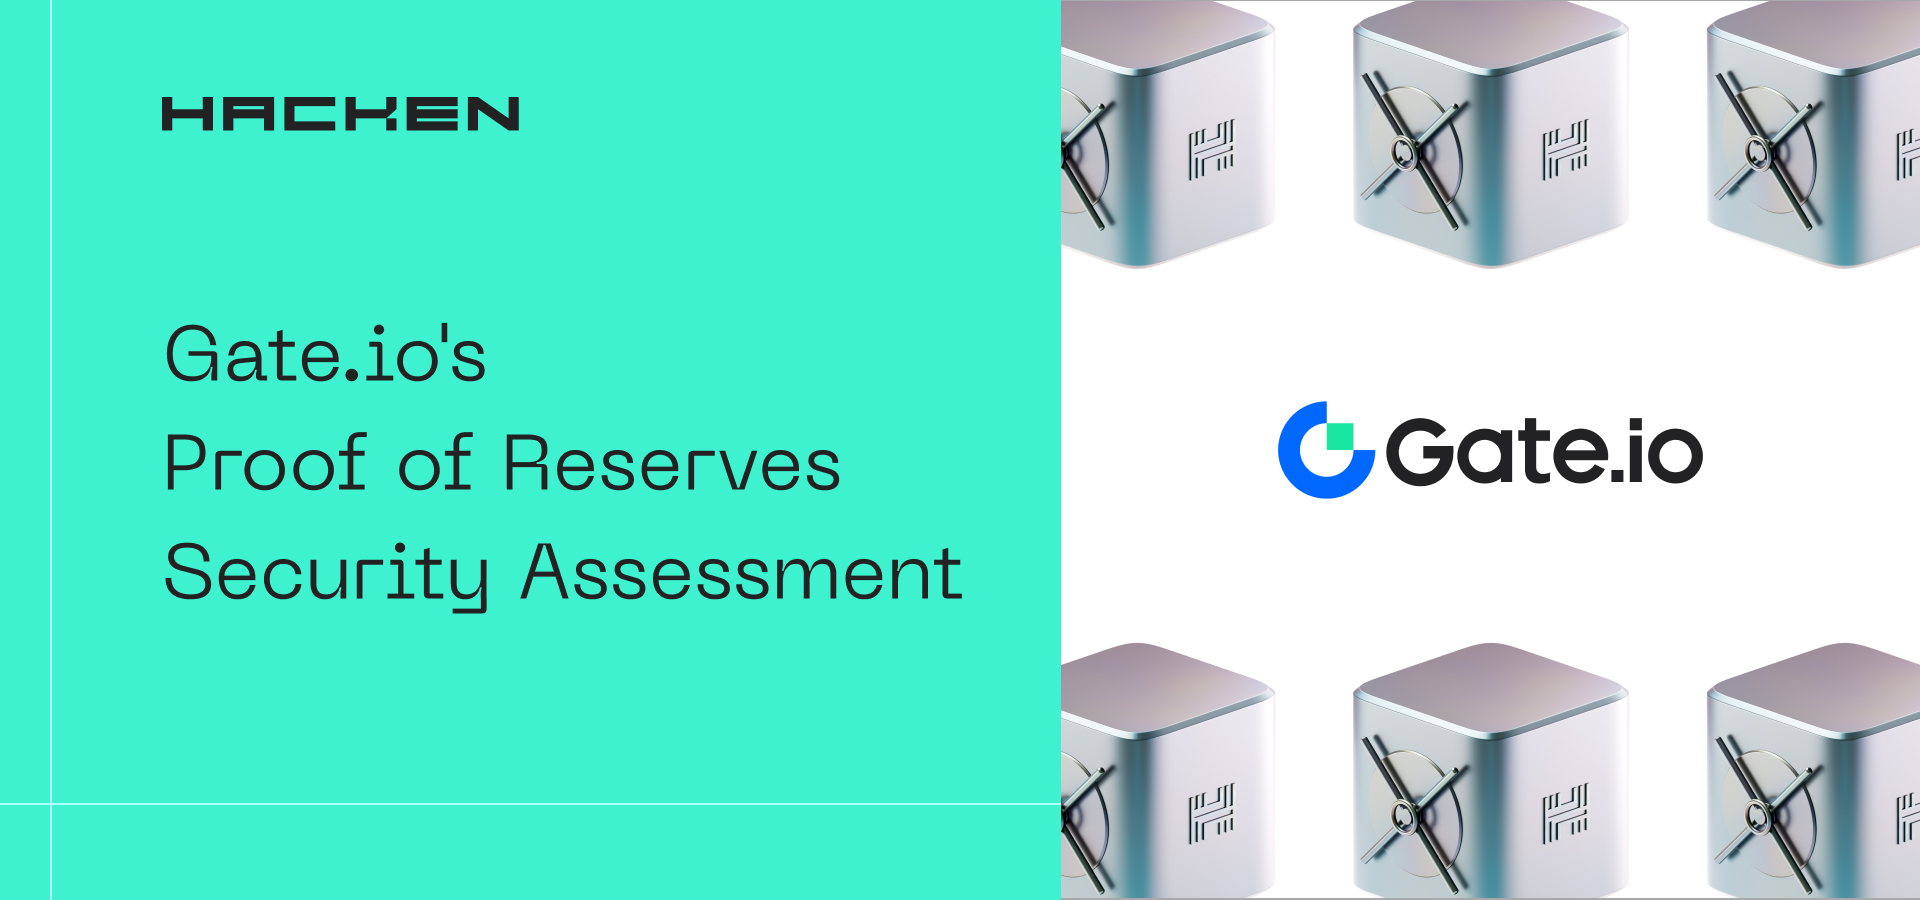 Gate.io's Proof of Reserves Security Assessment